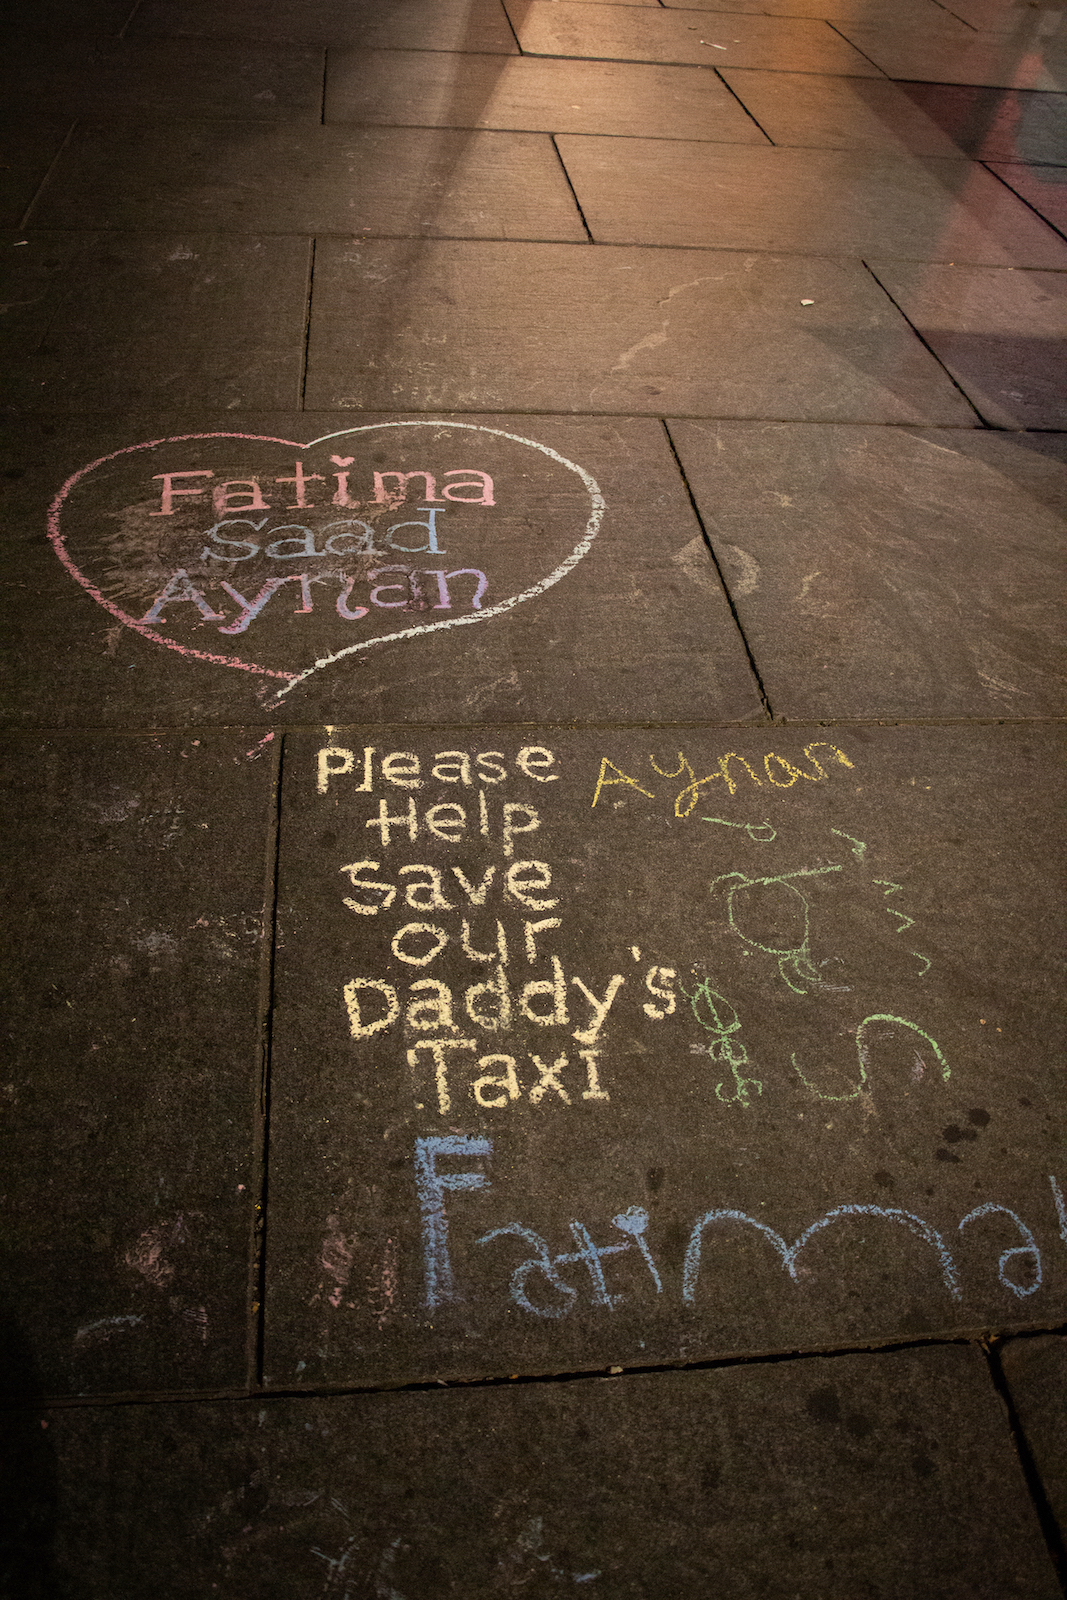 The colorful chalk drawings and writings of children are lit by streetlights on a dark city sidewalk. Inside a heart are the names Fatima, Saad and Aynan, and a message underneath the heart reads "Please help save our Daddy's taxi."